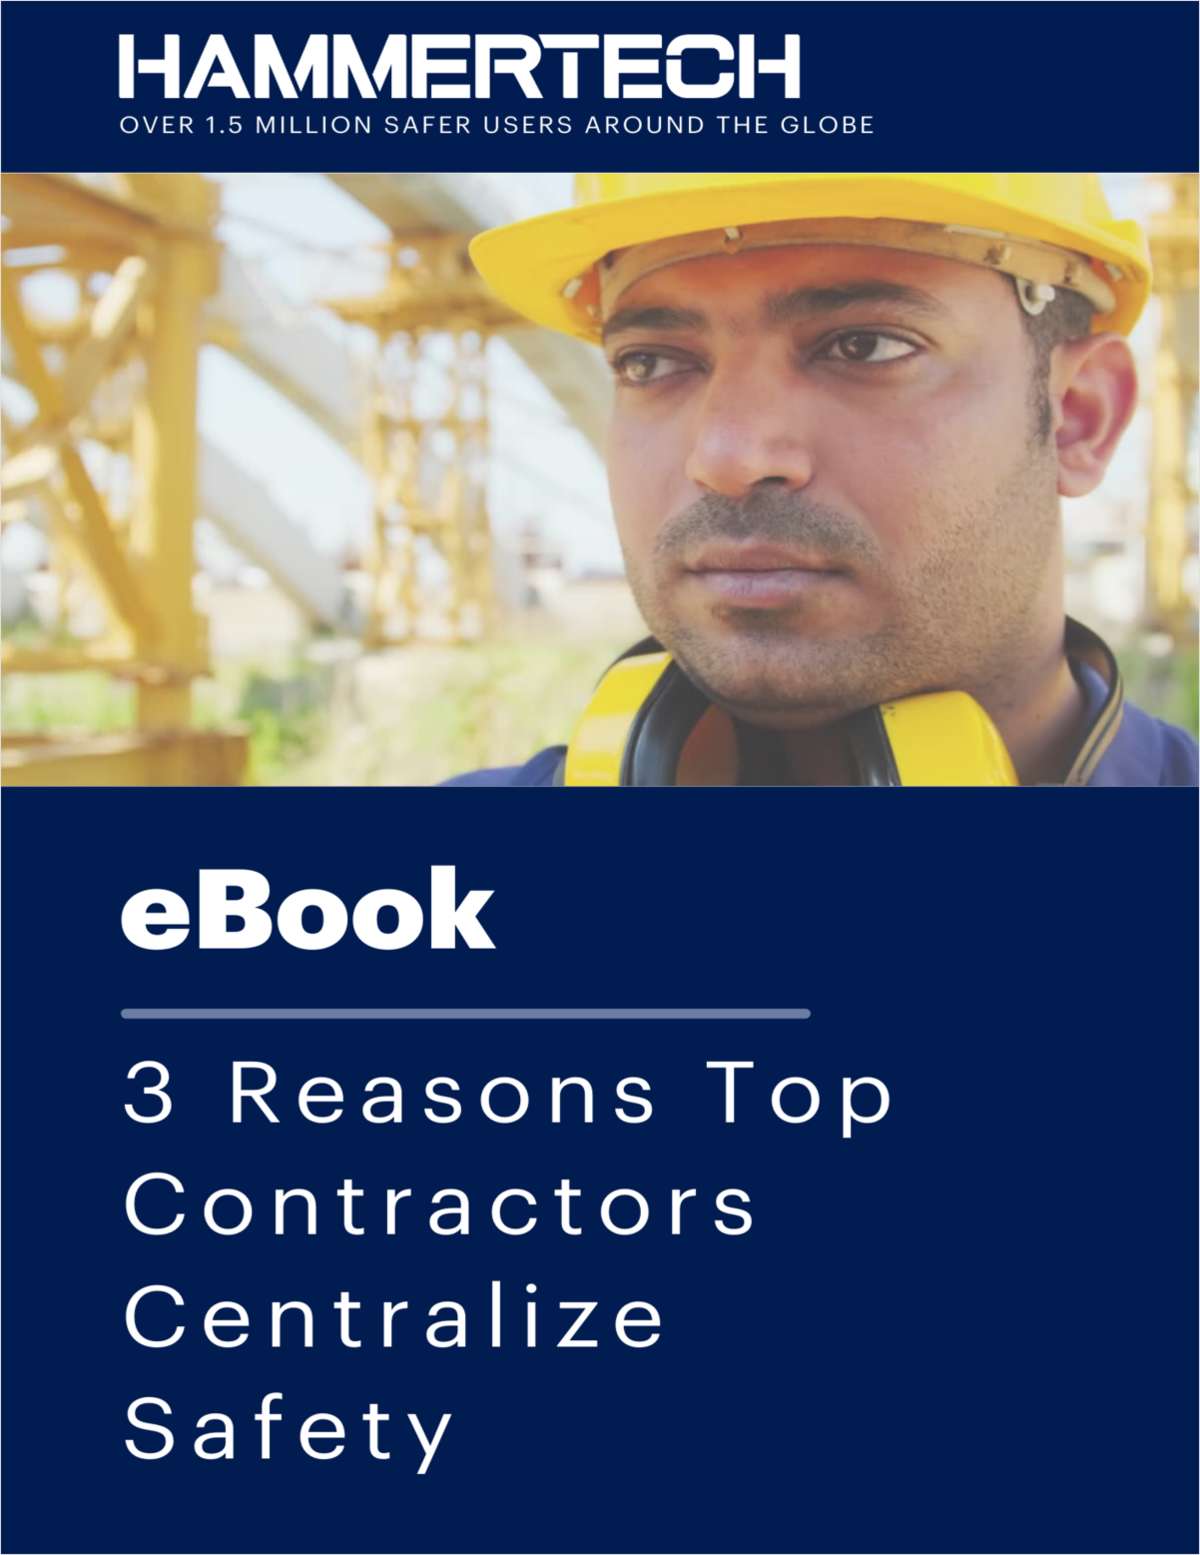 5 Reasons Top Contractors Operationalize Safety